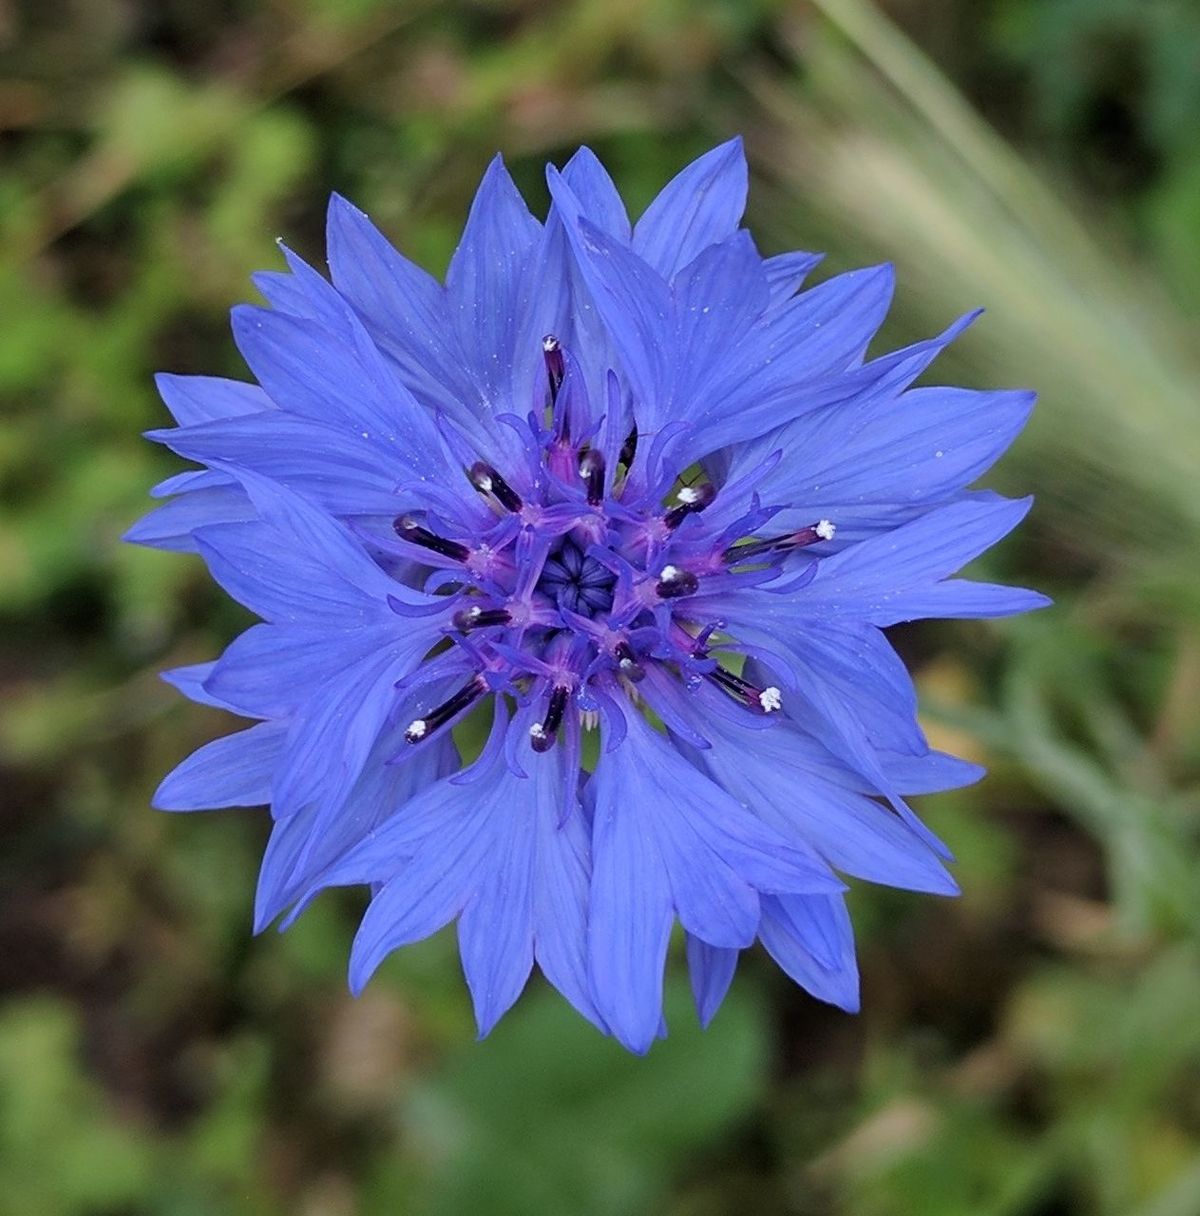 CLOSE-UP OF BLUE FLOWER BLOOMING